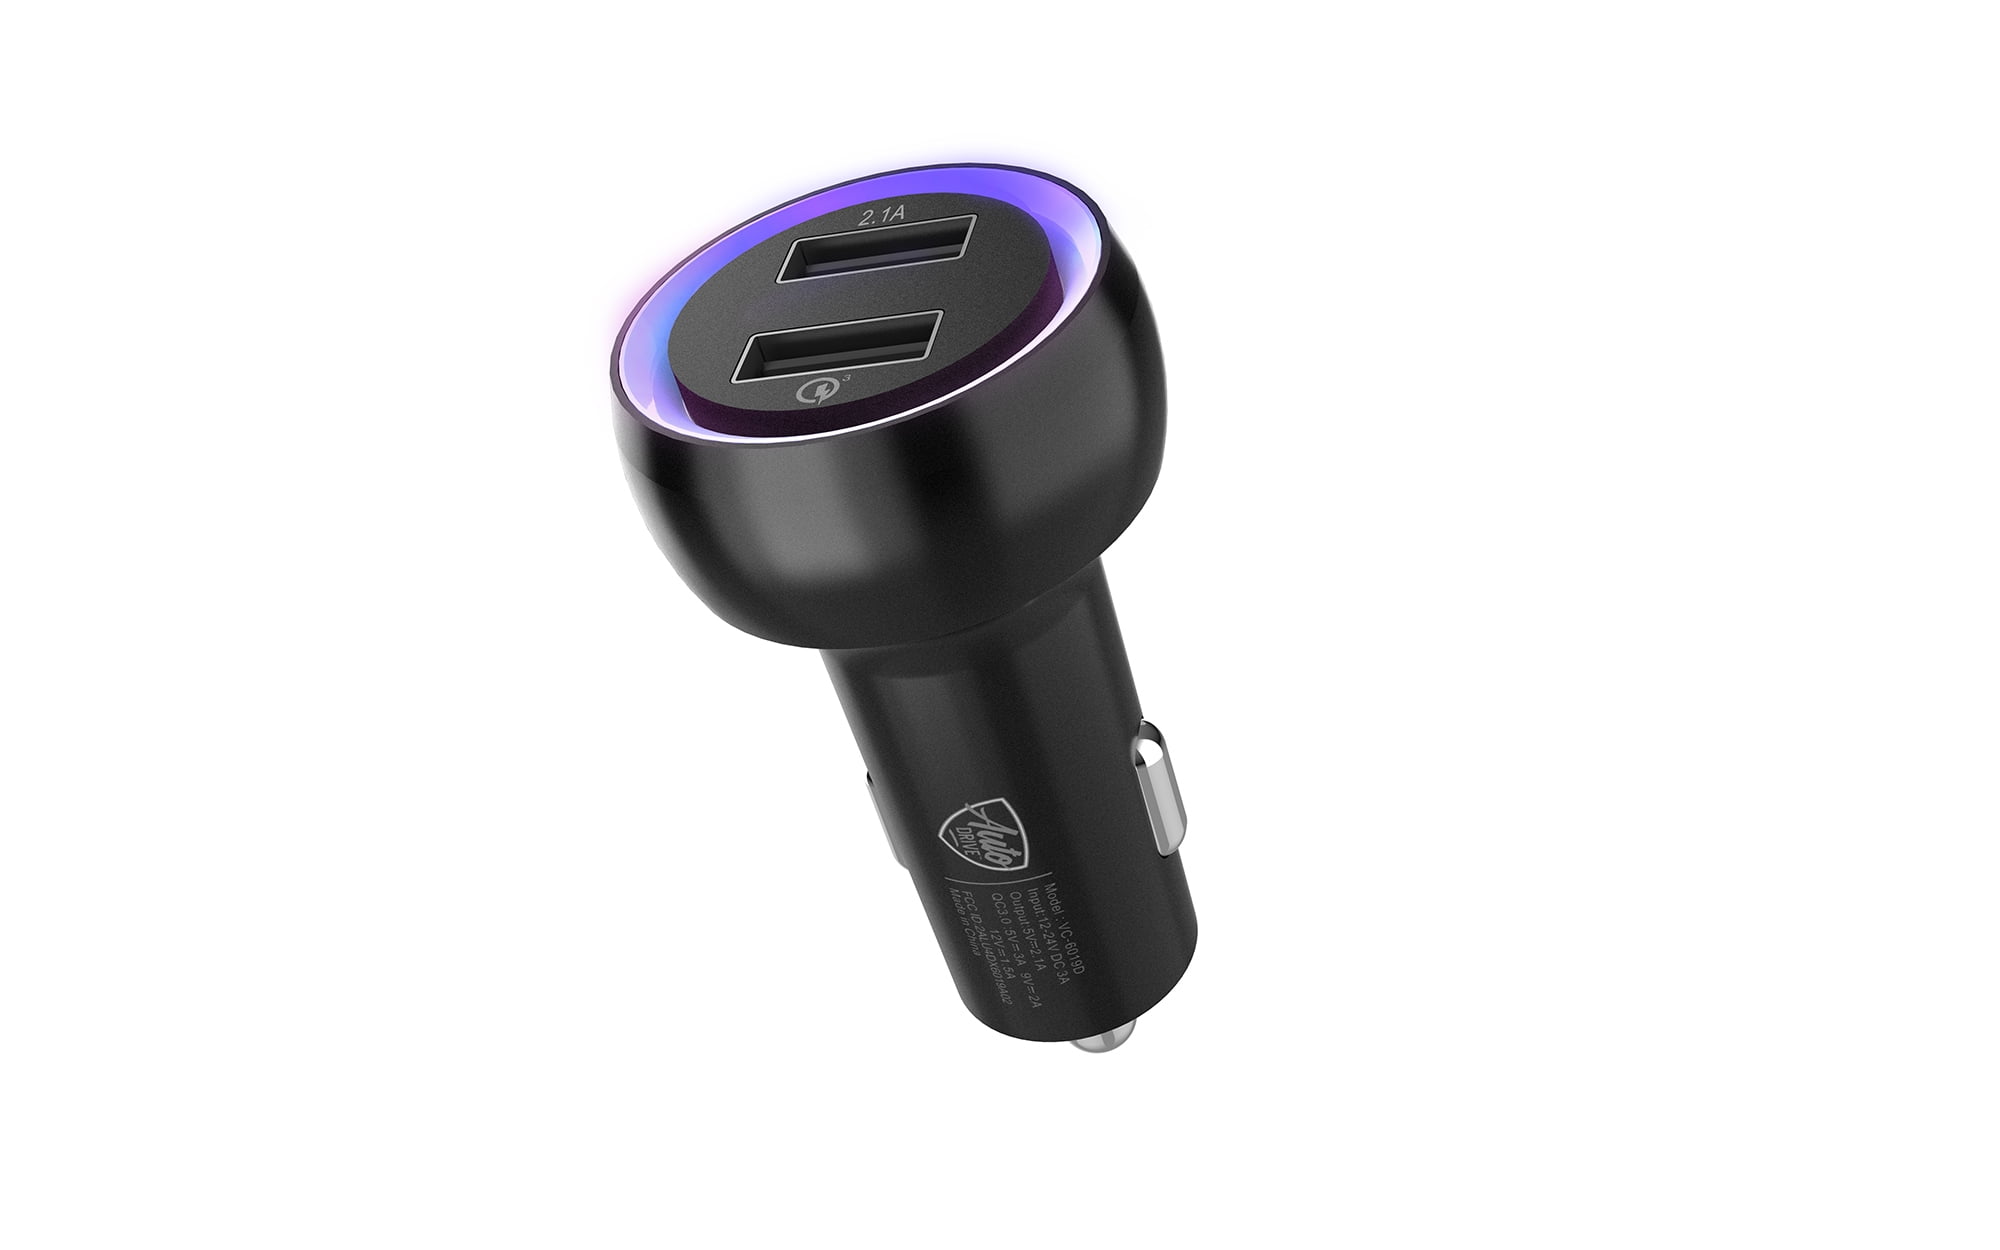 Auto Drive Car Charger with Pulsing Light, Dual USB Charging Ports, Parking Locator, Voltage Monitor APP Control